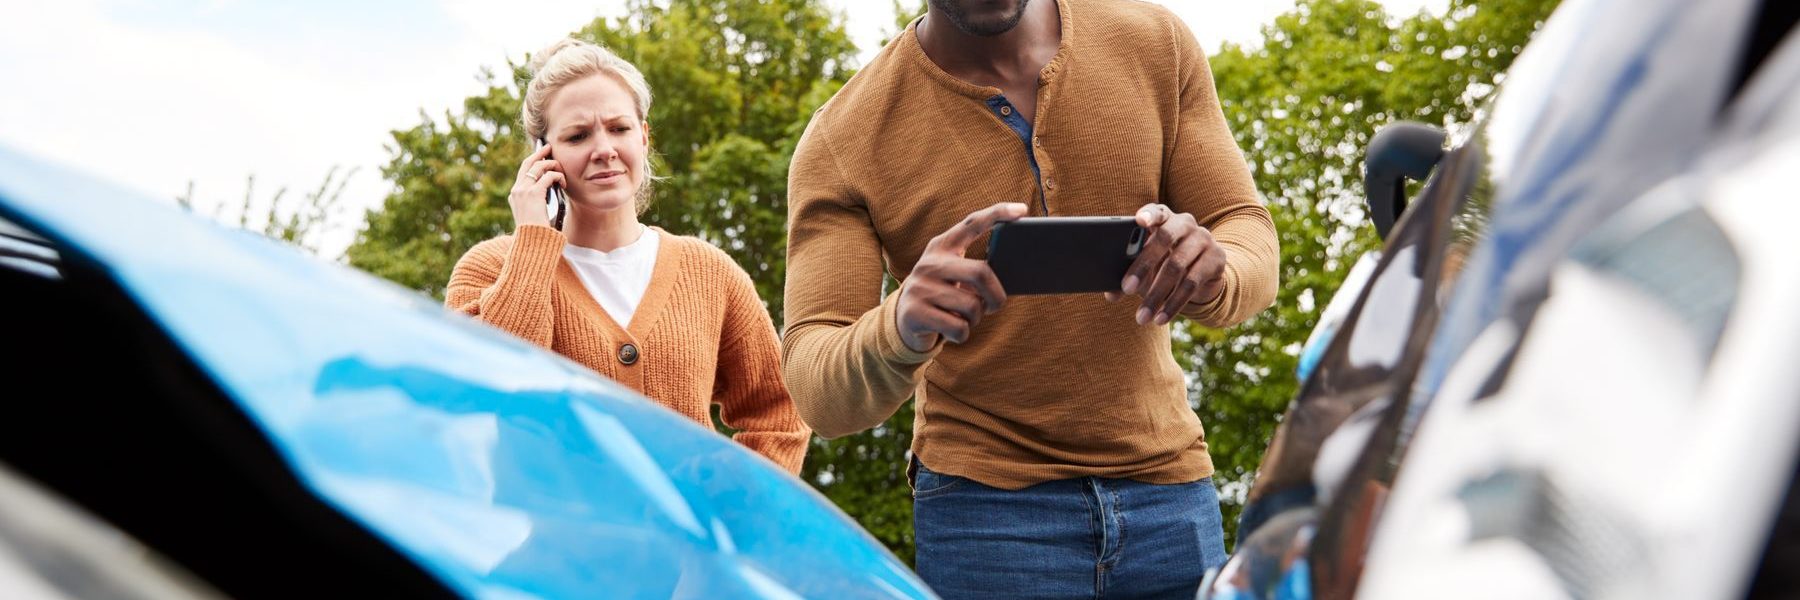 5 Documents Your Attorney Will Need After Your Car Accident